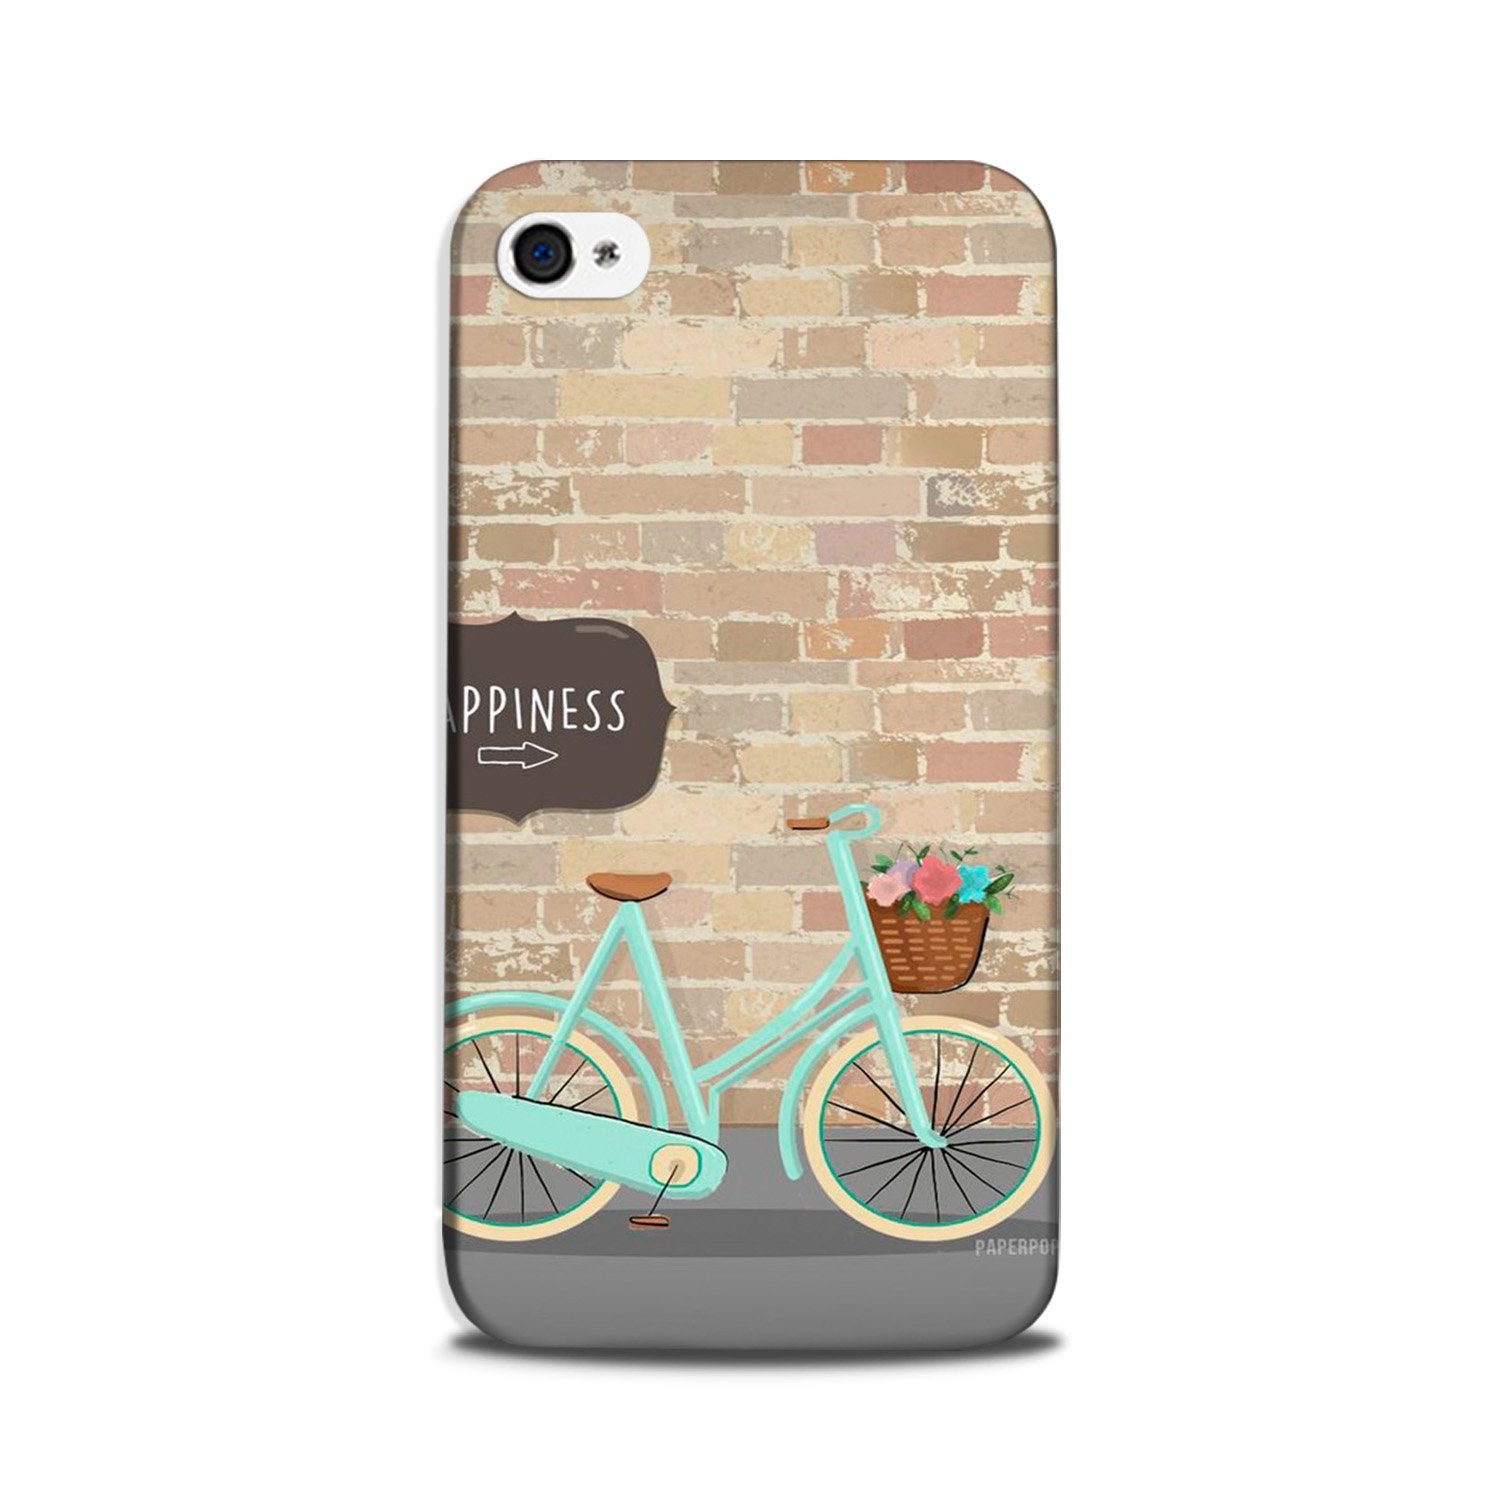 Happiness Case for iPhone 5/ 5s